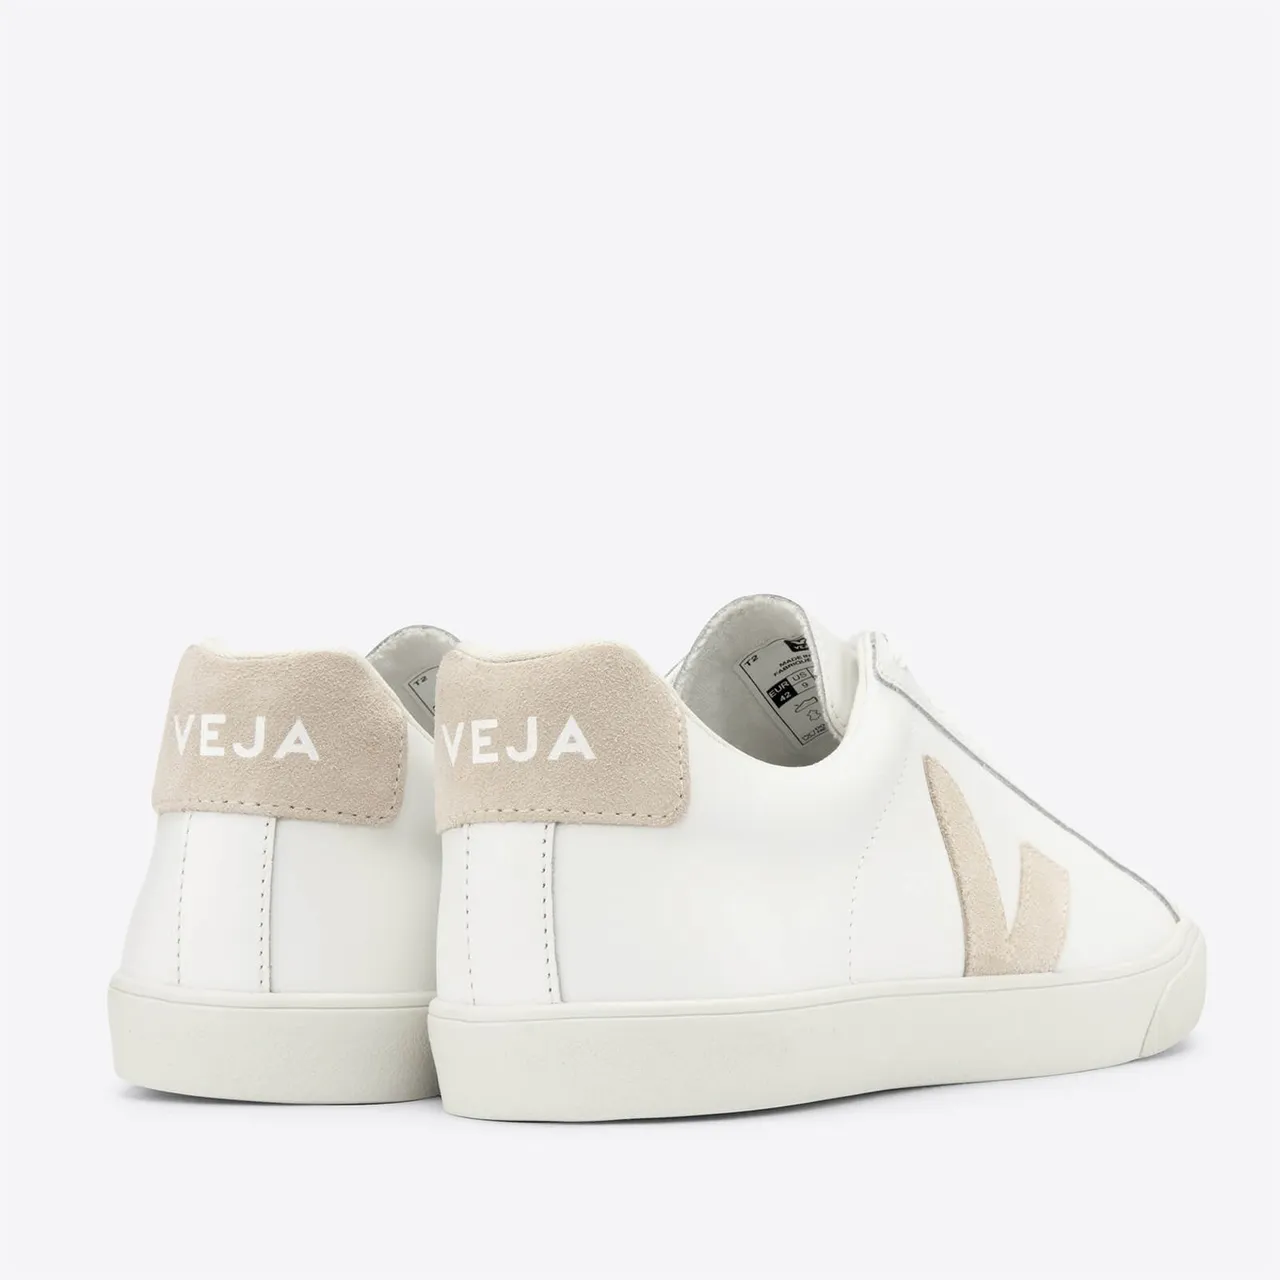 Veja Women's Esplar Leather Low Top Trainers - Extra White/Sable - UK